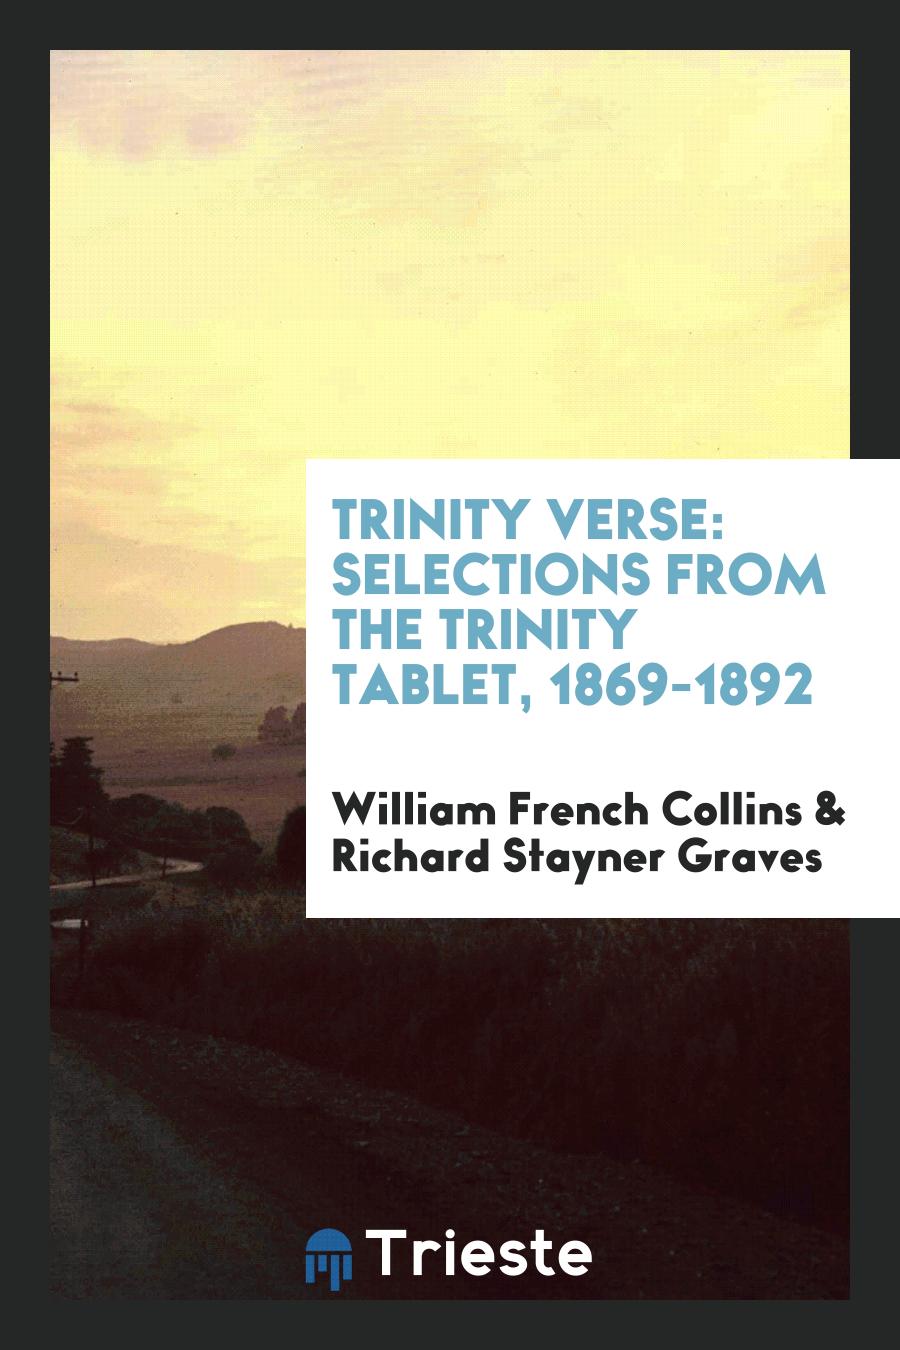 Trinity Verse: Selections from the Trinity Tablet, 1869-1892